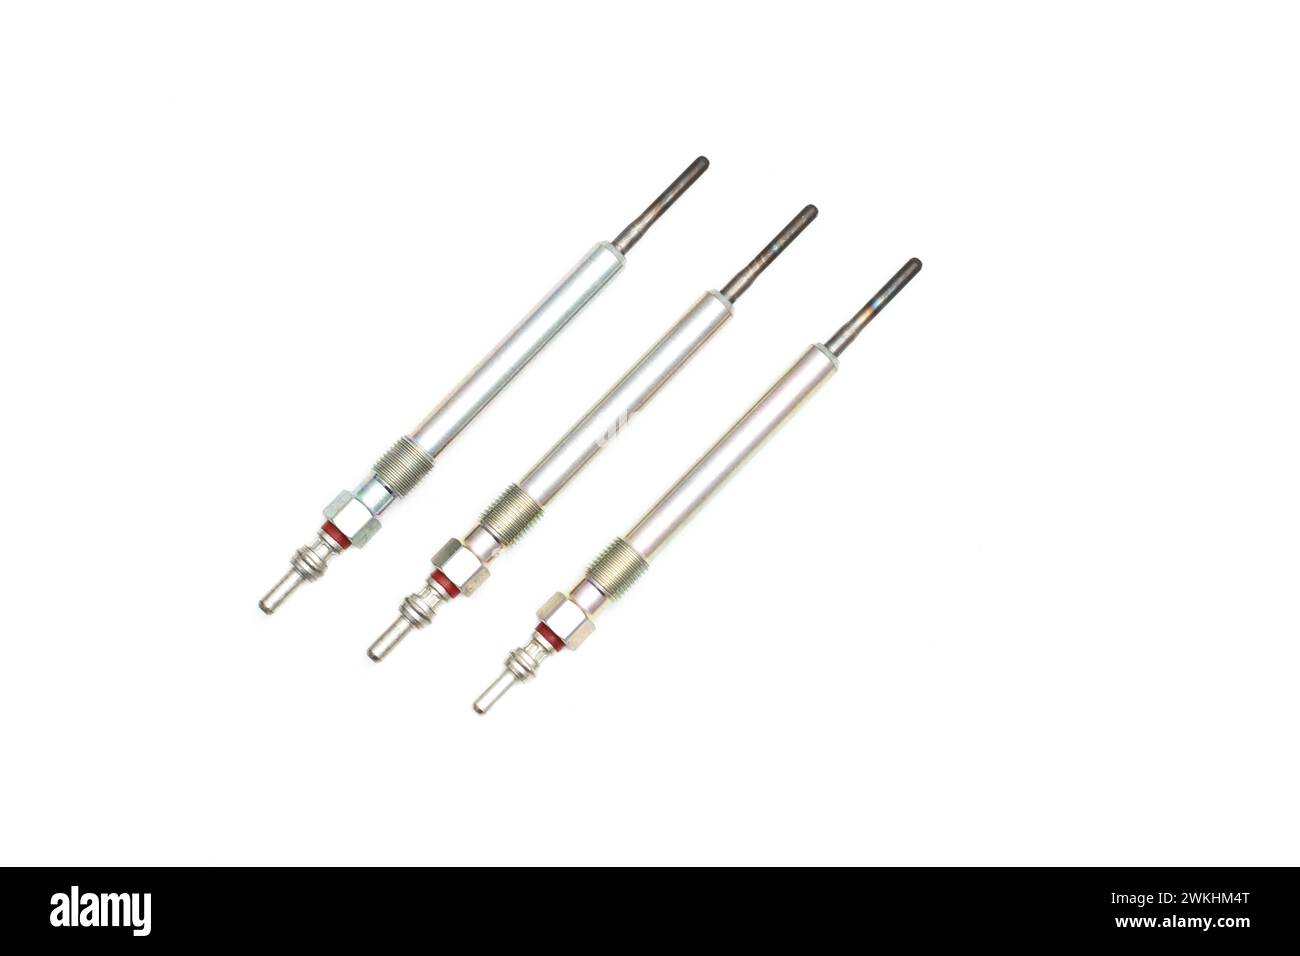 Rod ceramic glow plugs for a diesel engine on a white background, close-up, isolate. Stock Photo